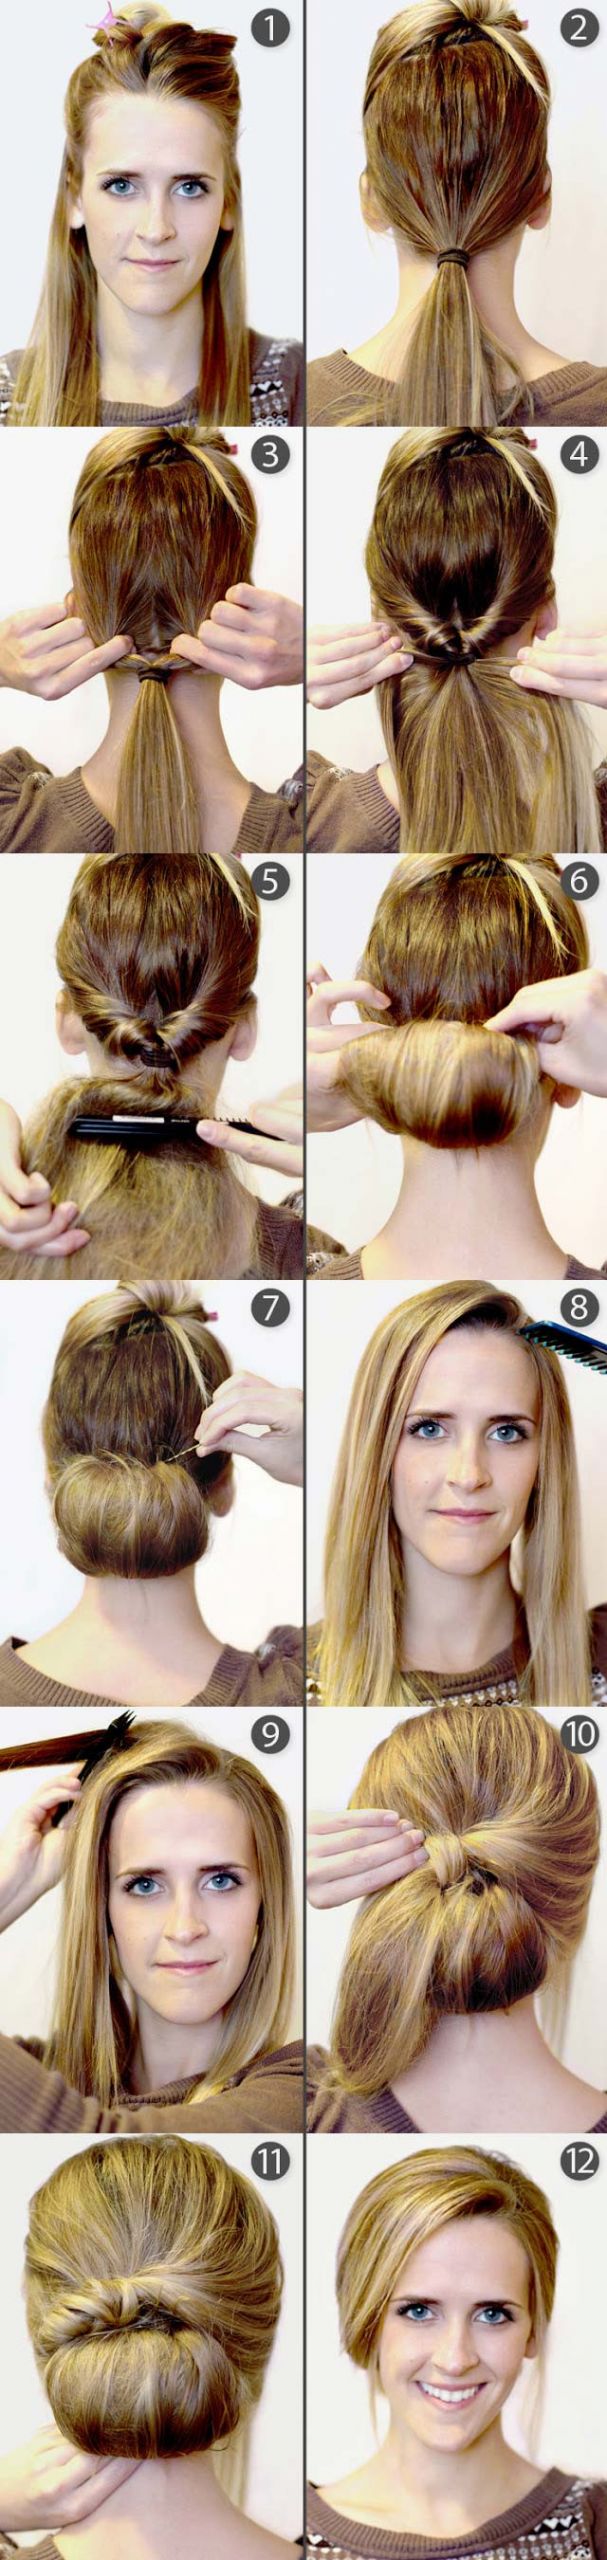 Cute Hairstyles Step By Step
 DIY Your Step by Step for the Best Cute Hairstyles